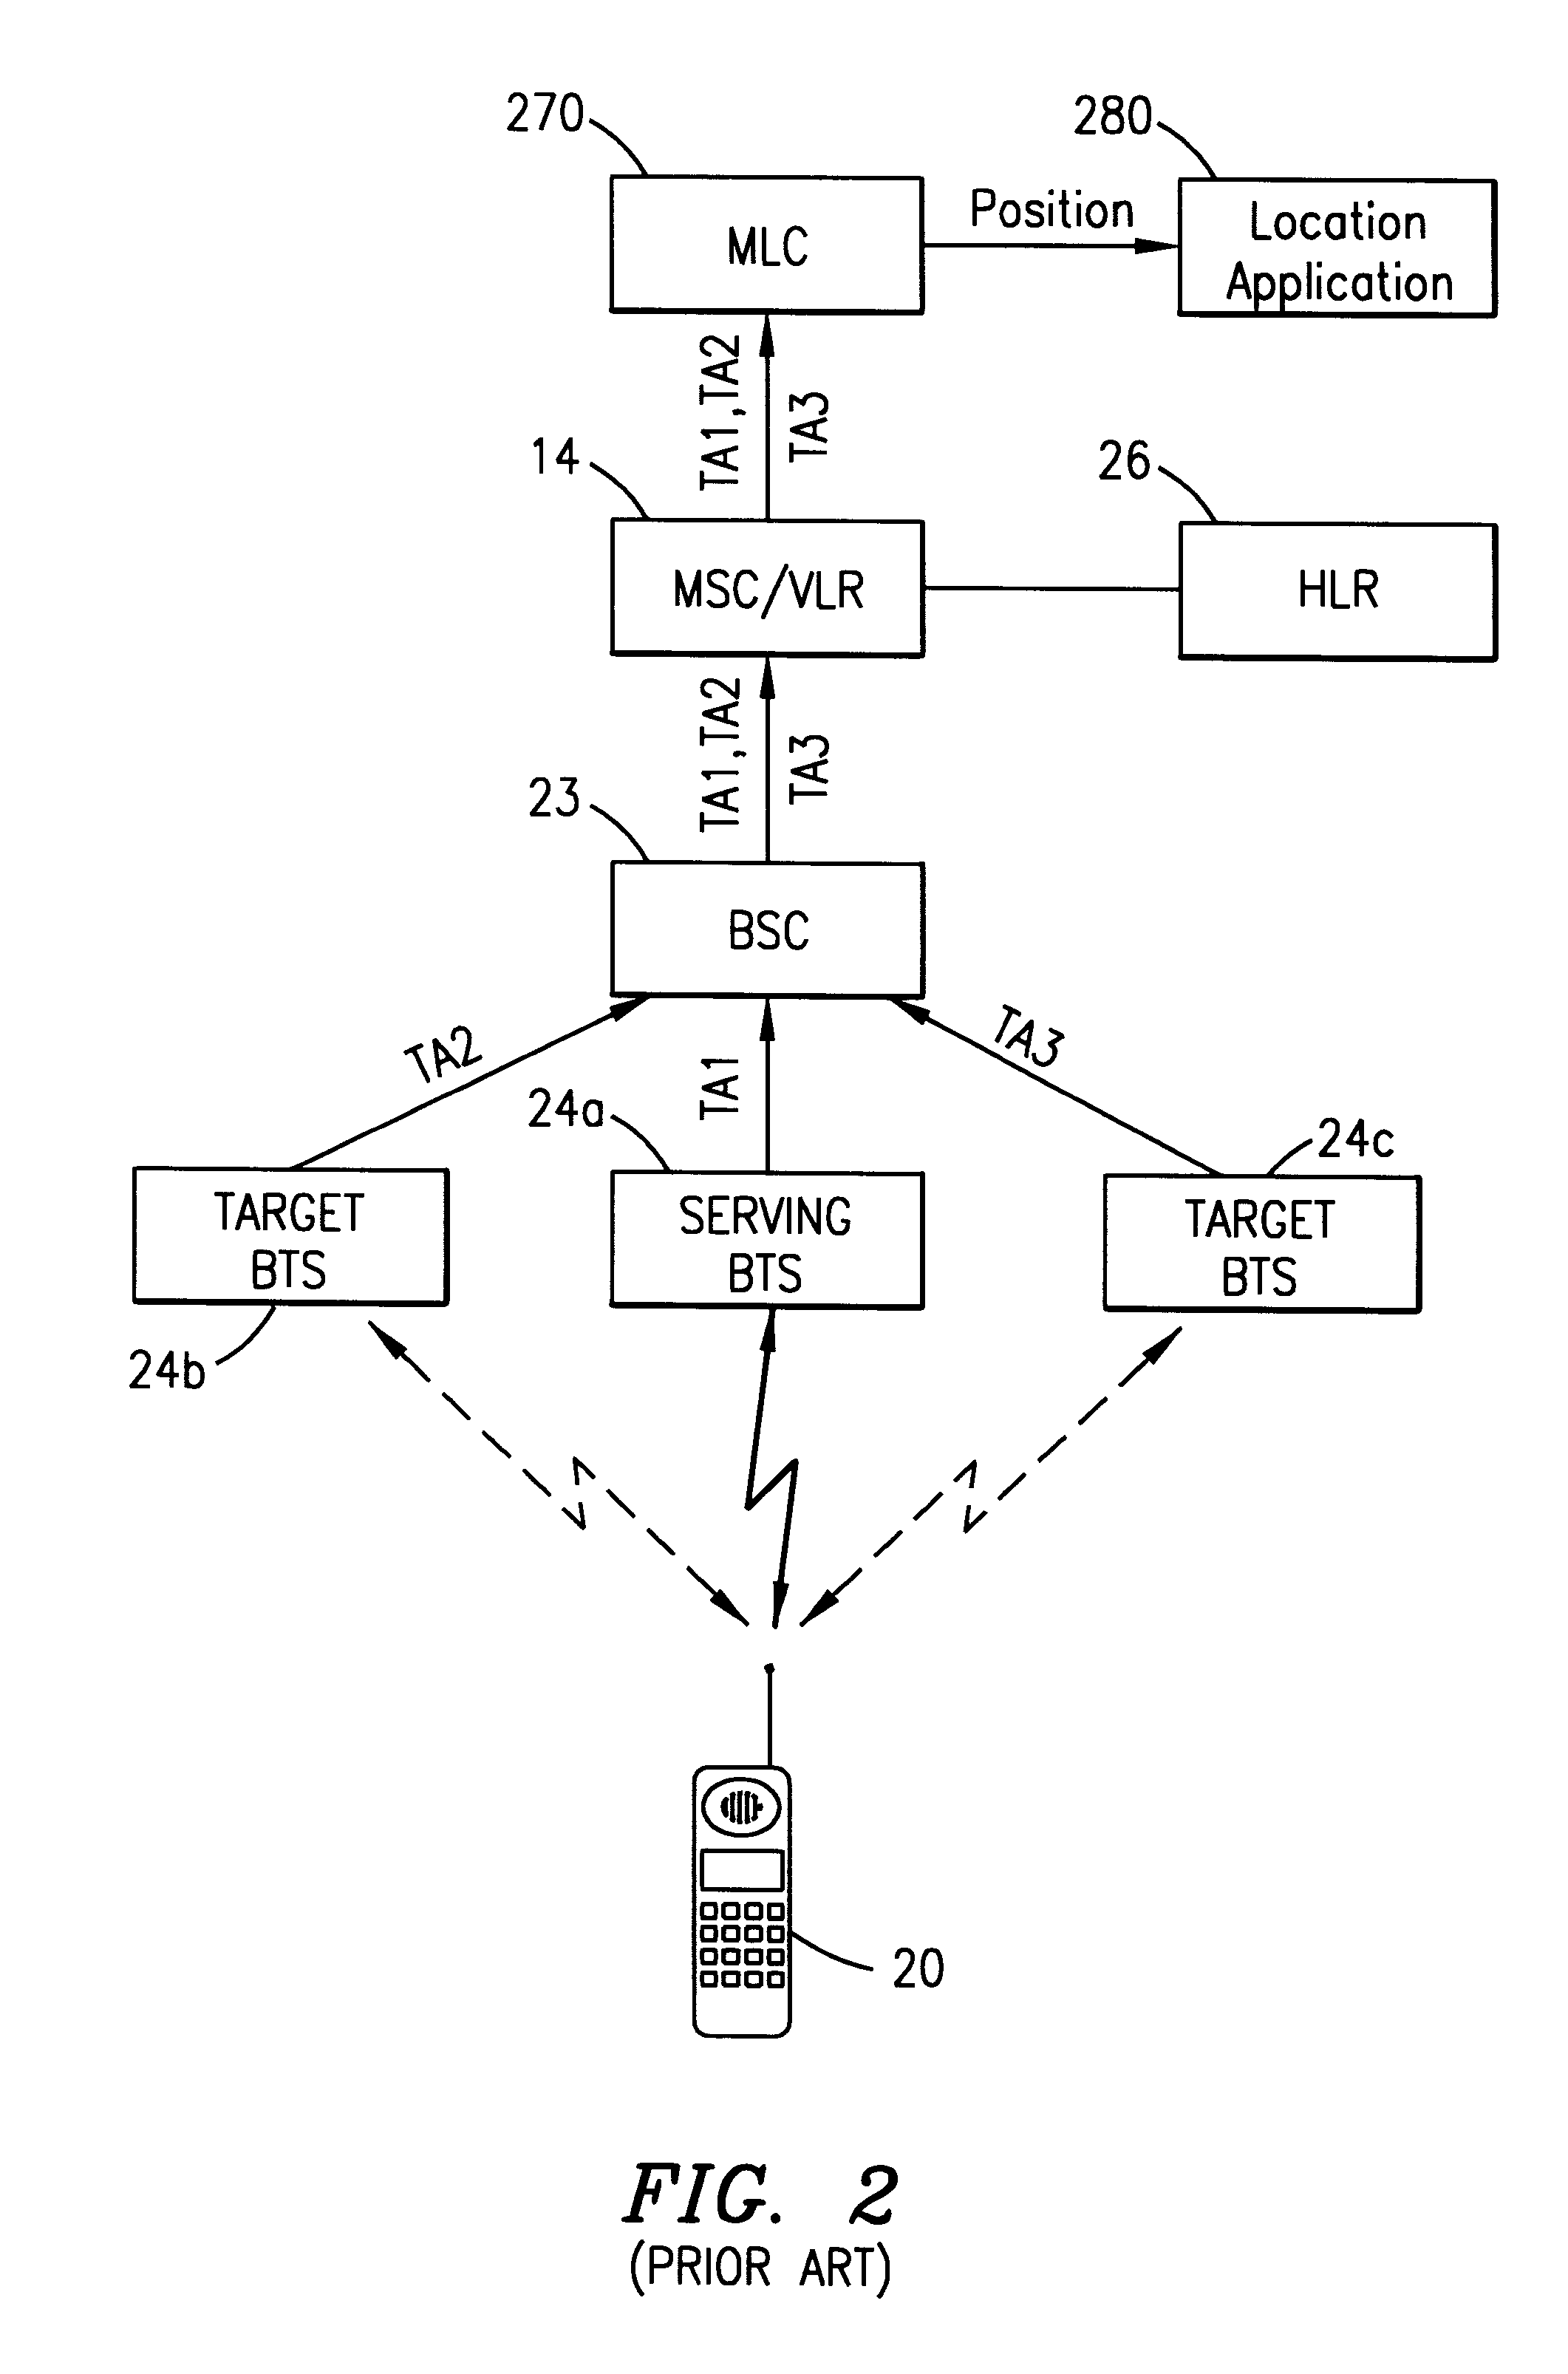 System and method for providing efficient signaling for a positioning request and an indication of when a mobile station becomes available for location services